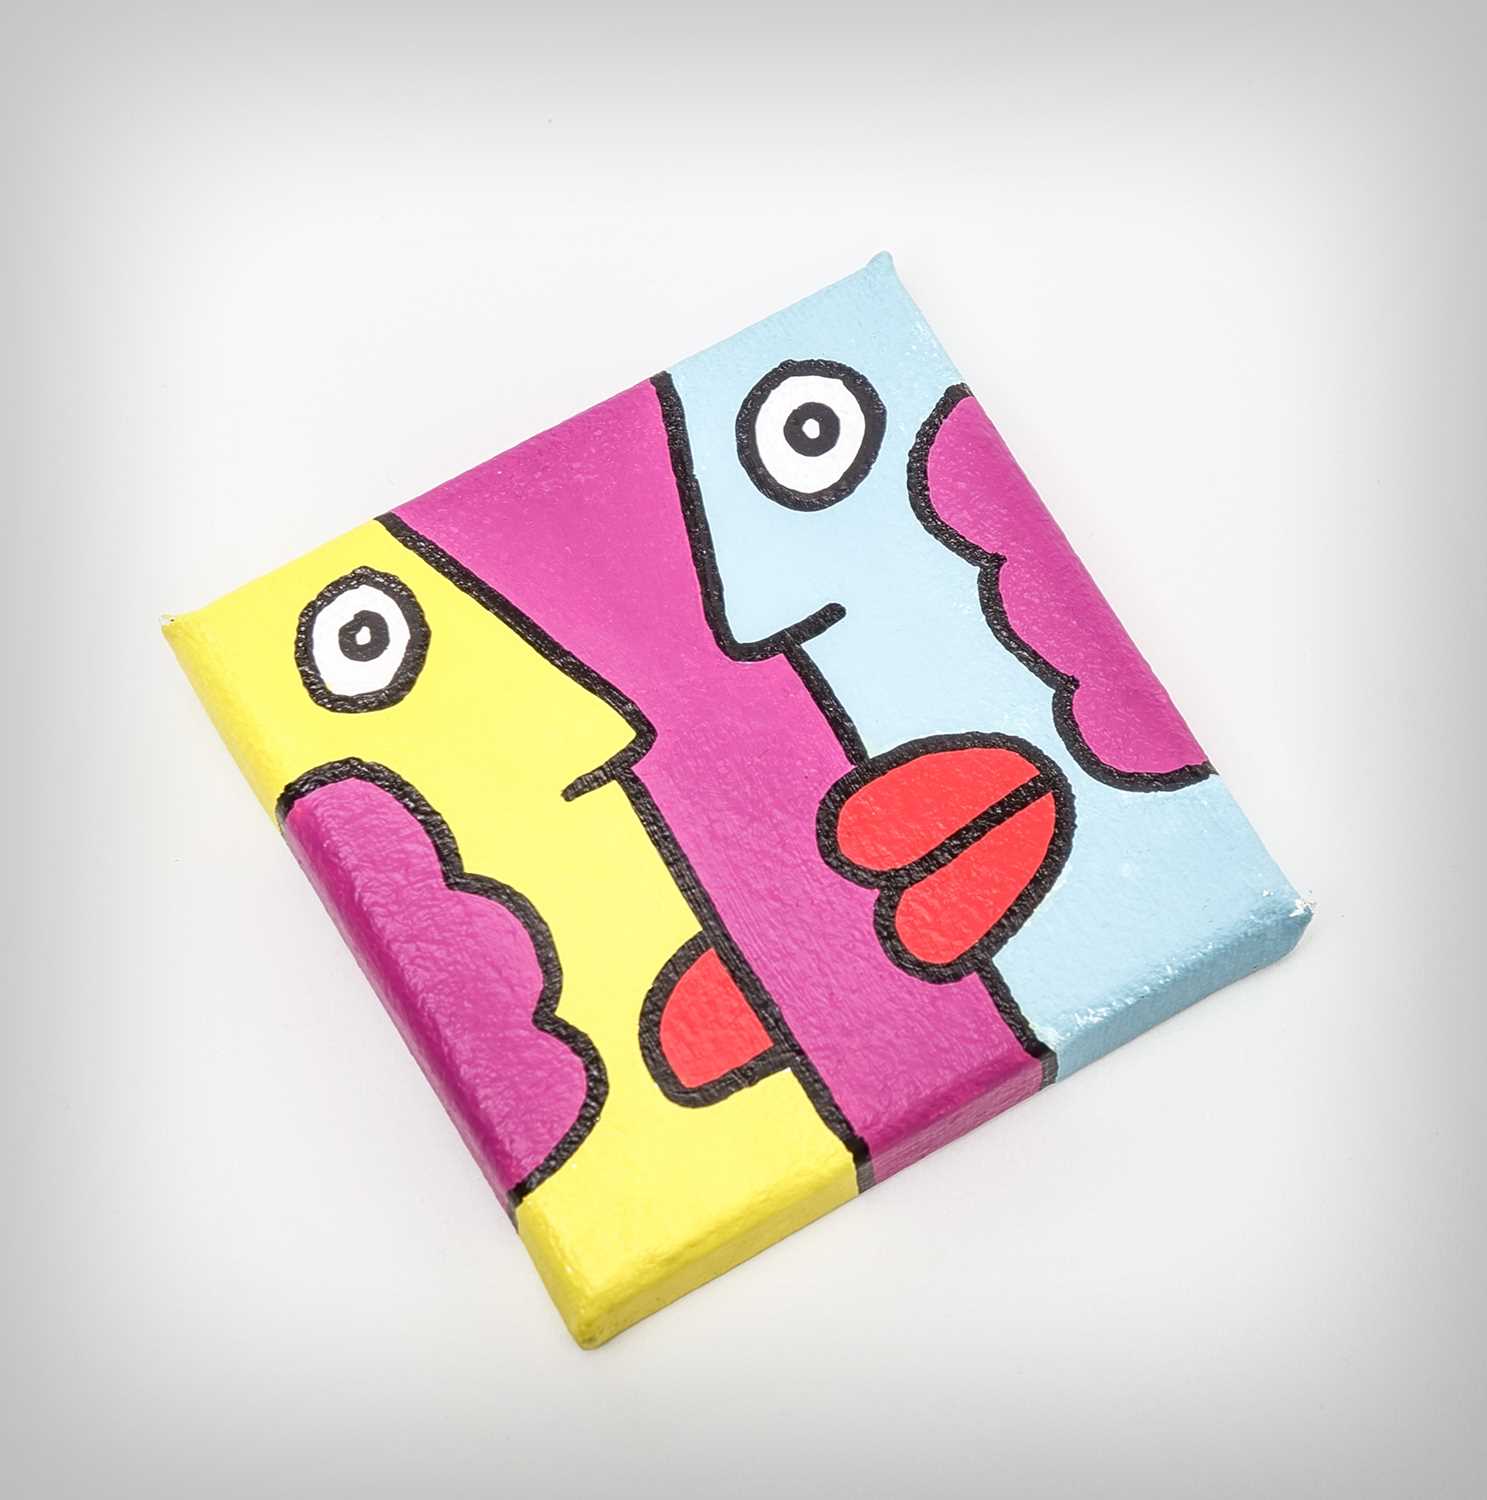 Lot 120 - Thierry Noir (French 1958-), 'Untitled', 2012